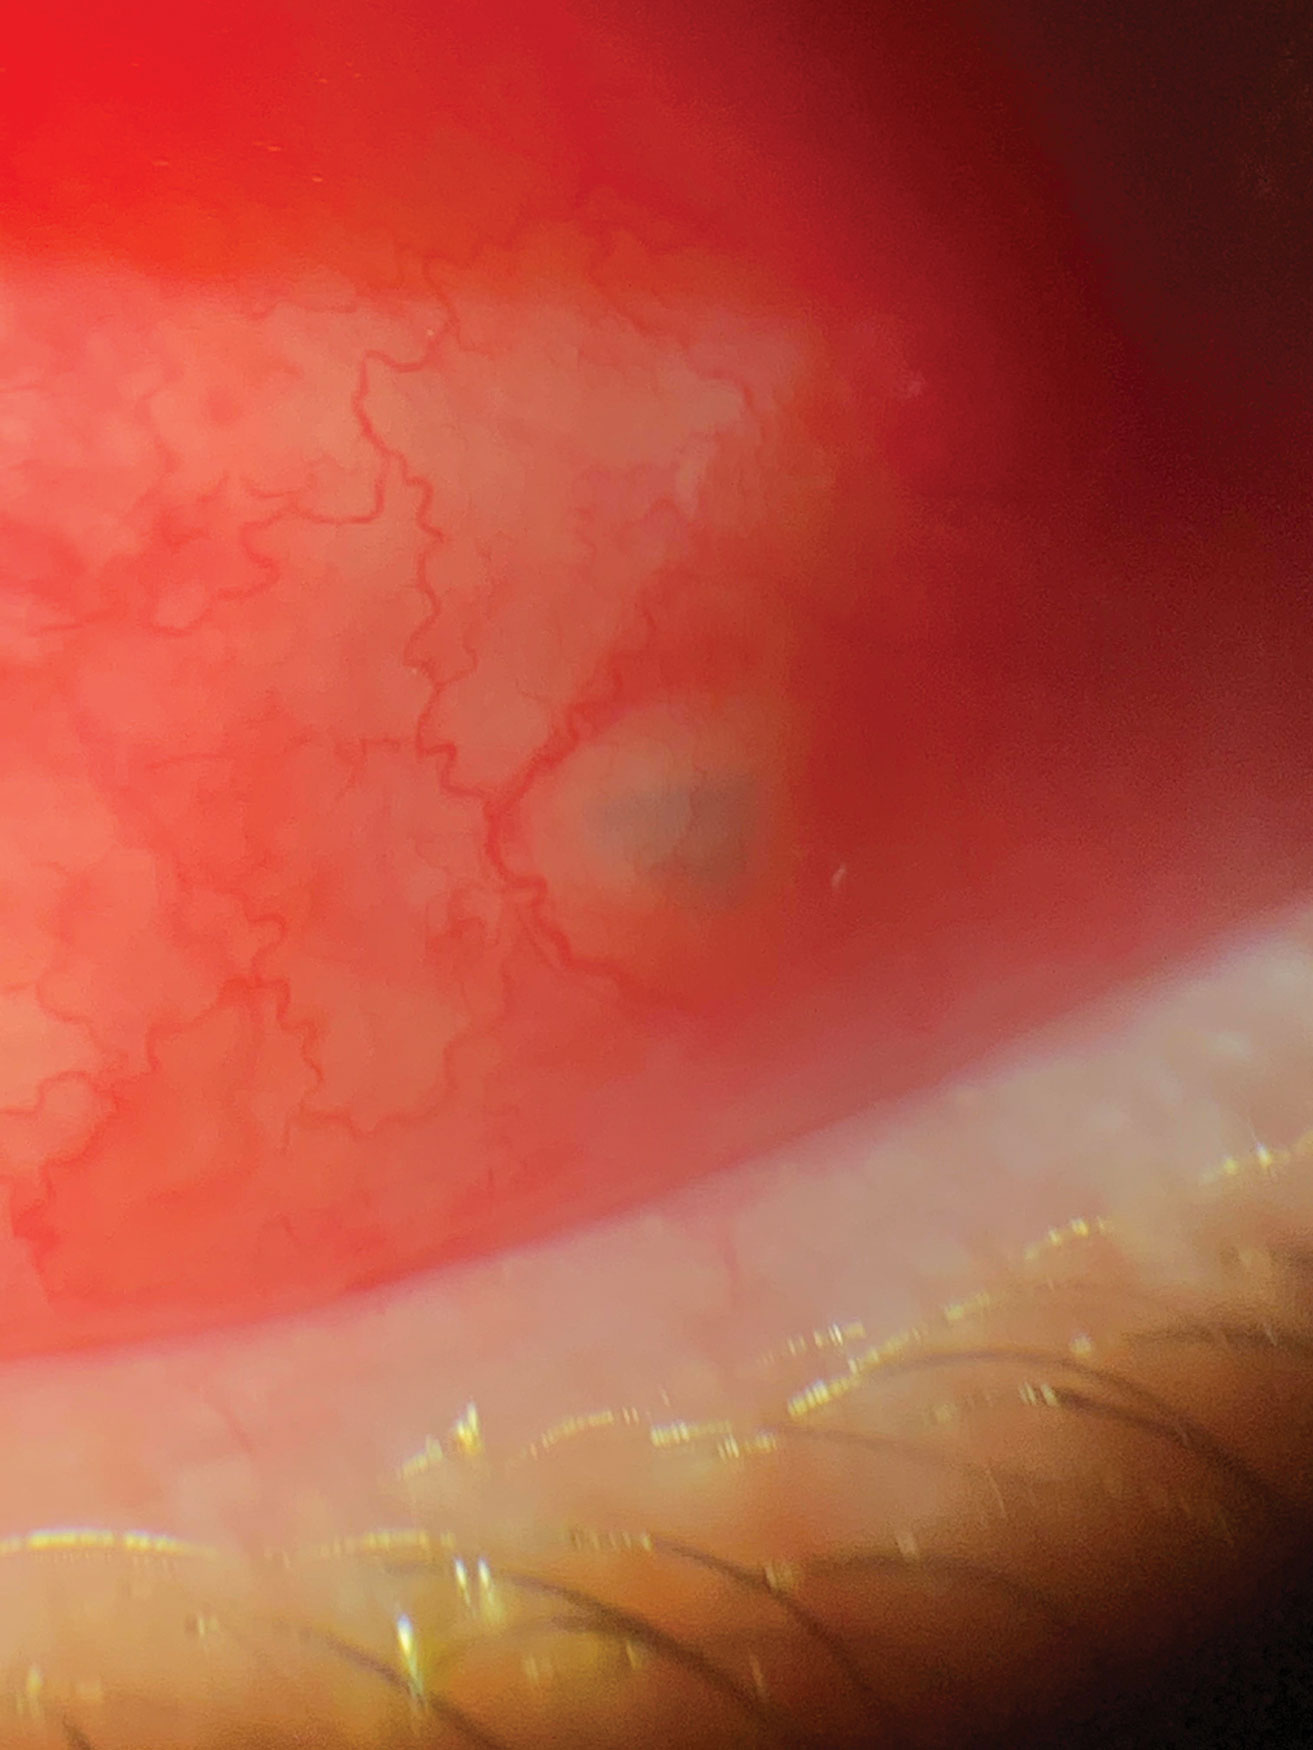 This patient presented to the office within eight hours of being hit in the eye with a tree branch. A piece of bark had lodged itself under the conjunctiva. The foreign body was removed with forceps through the entry point with no sutures needed.